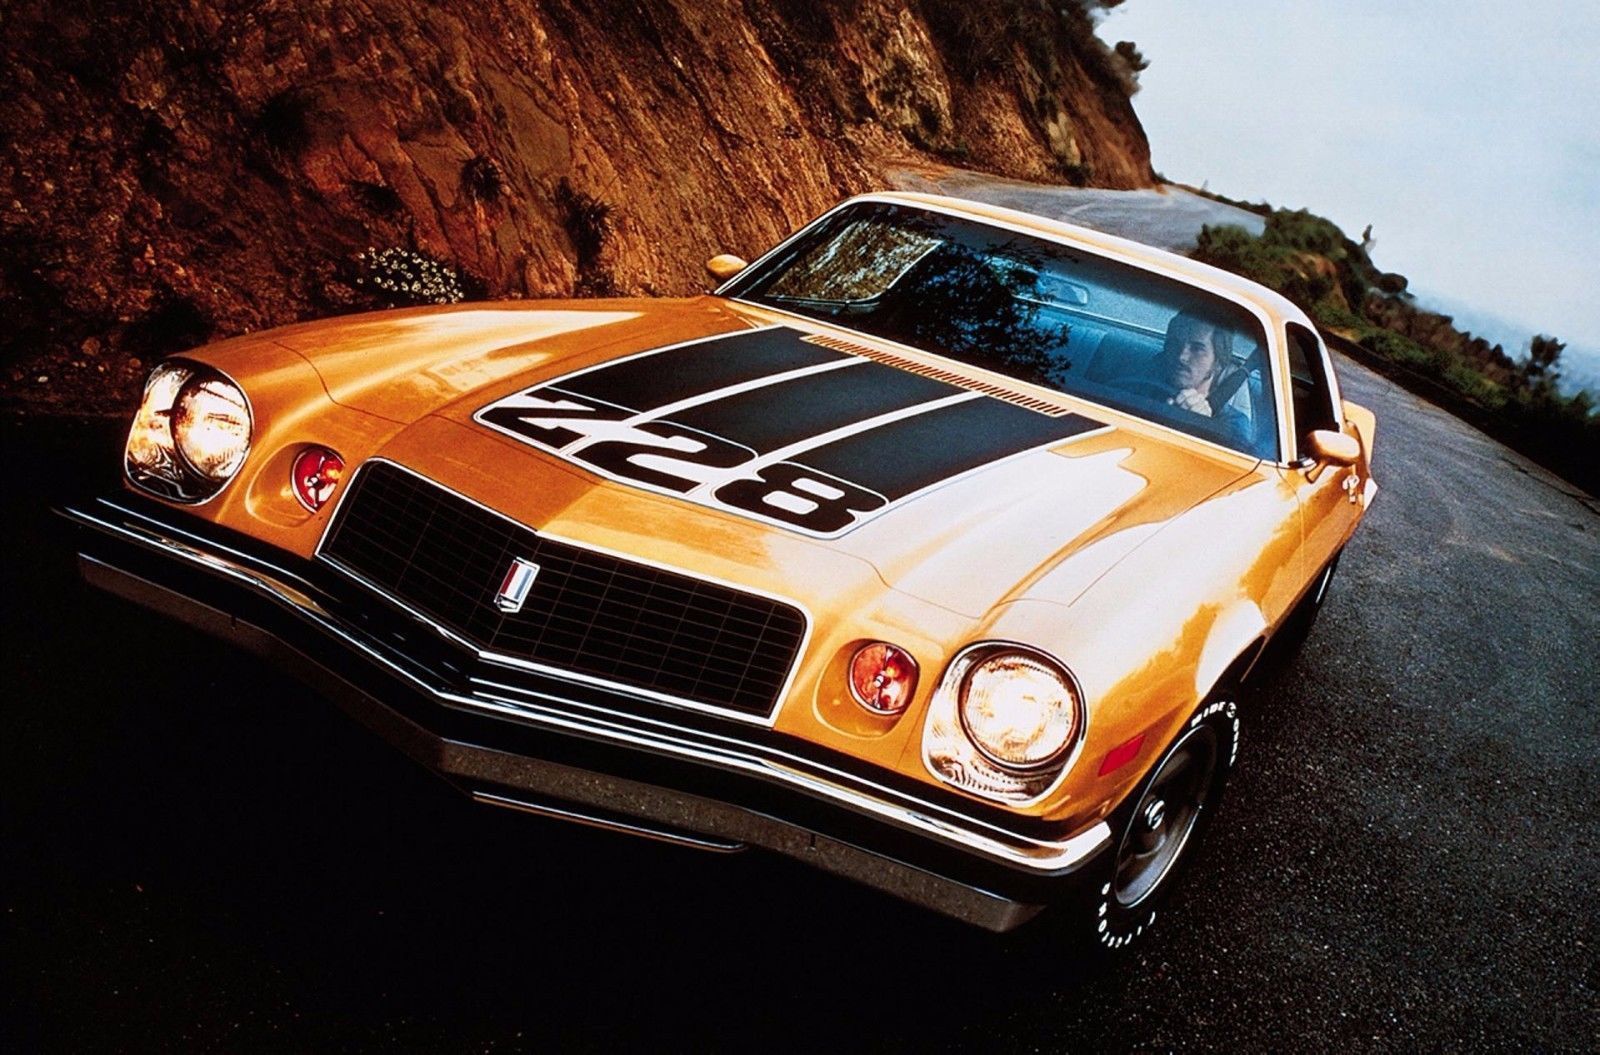 1974 CHEVROLET CAMARO Z28 (Road) POSTER | 24 x 36 INCH | muscle car